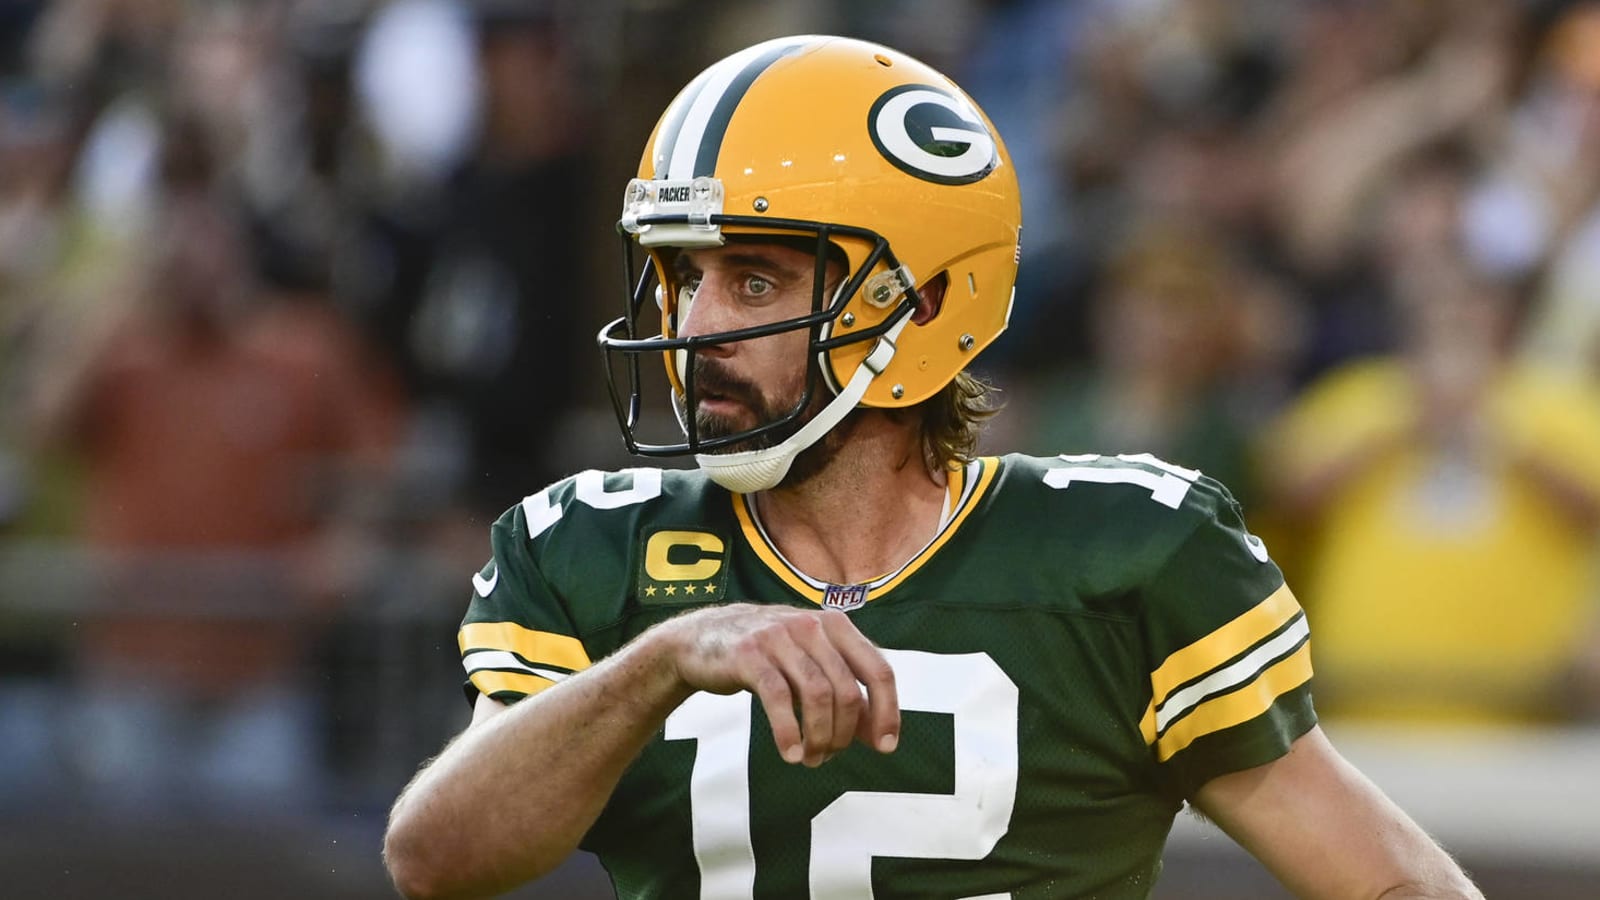 Rodgers: 'If we’re starting to freak out after one week, we’re in big trouble'